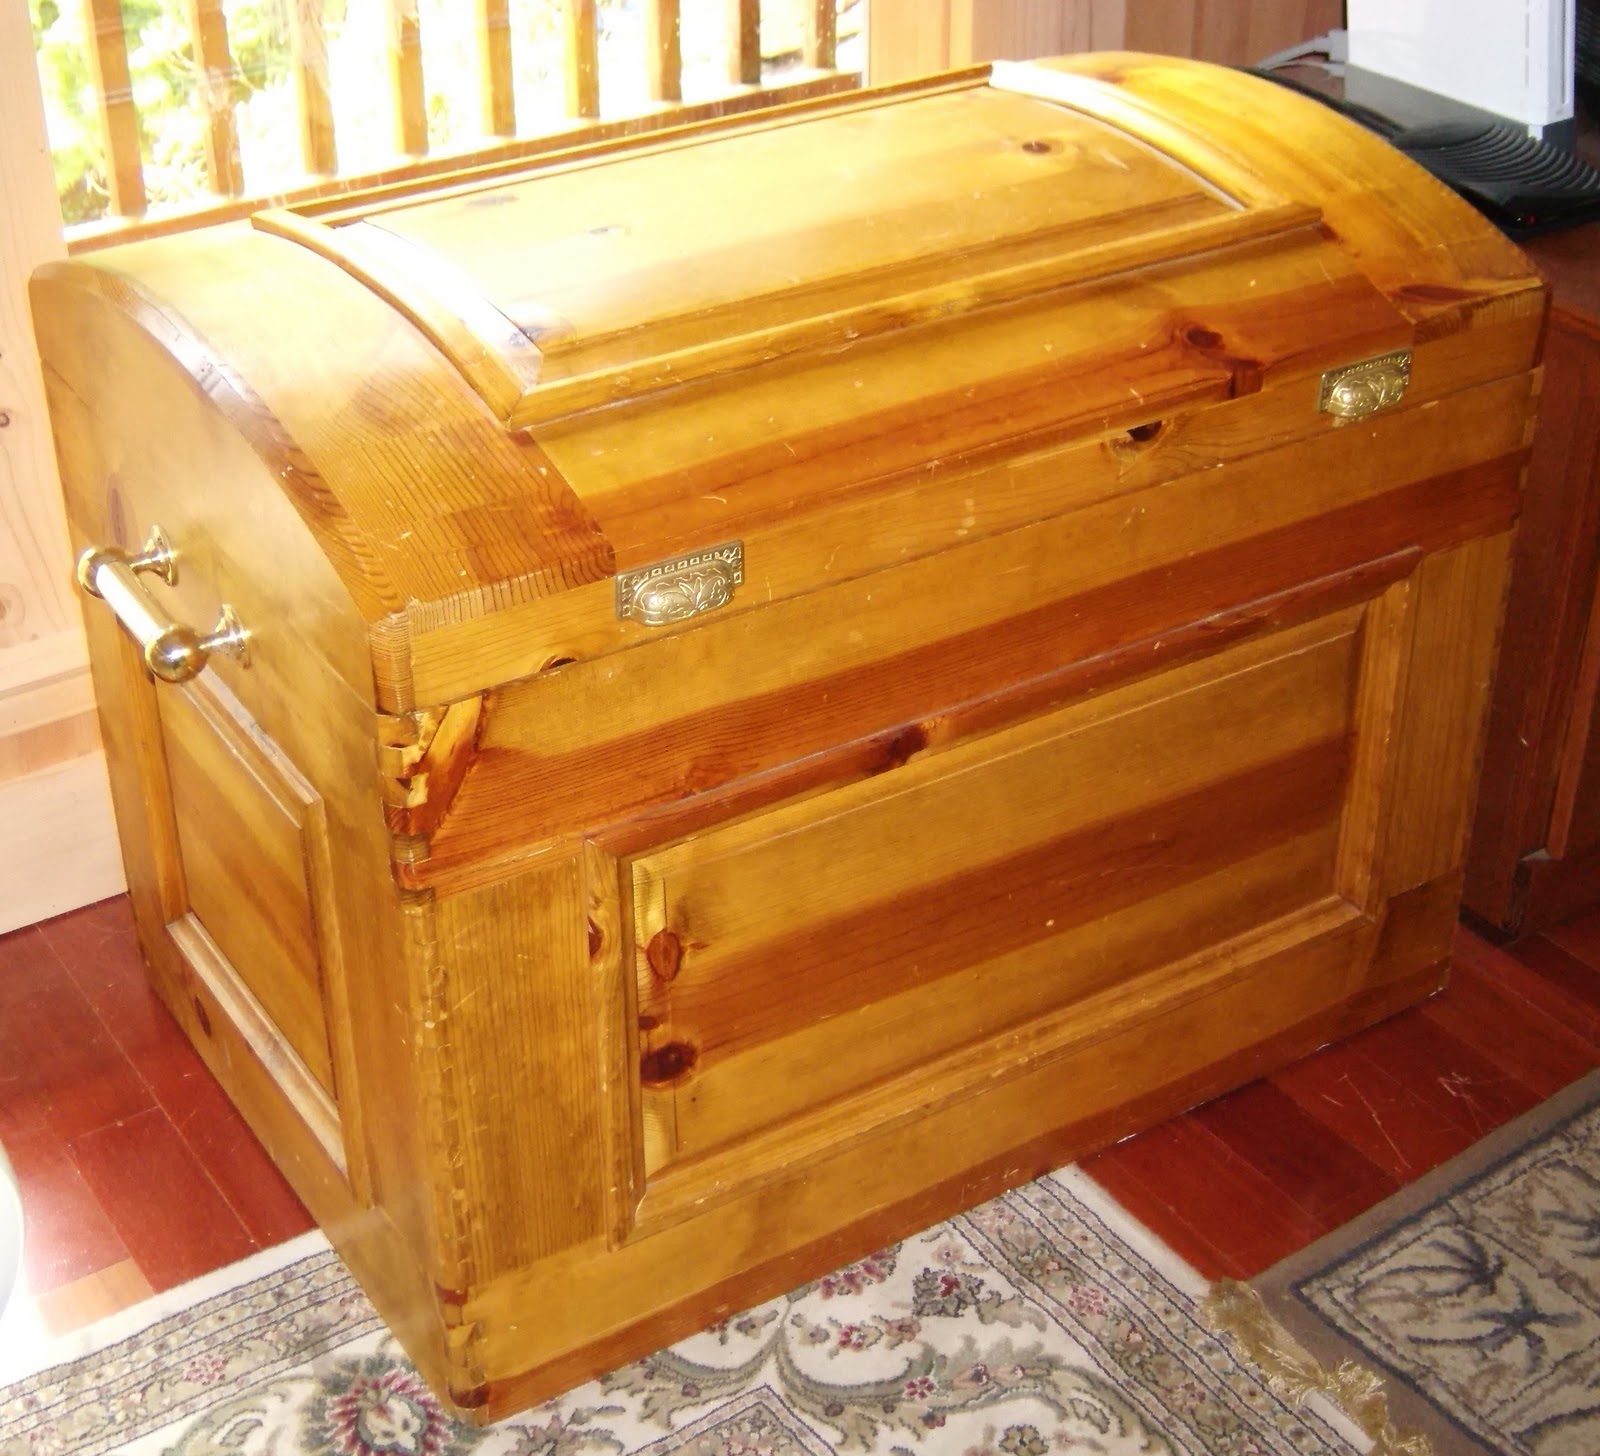 Woodworking cedar chest woodworking plans PDF Free Download